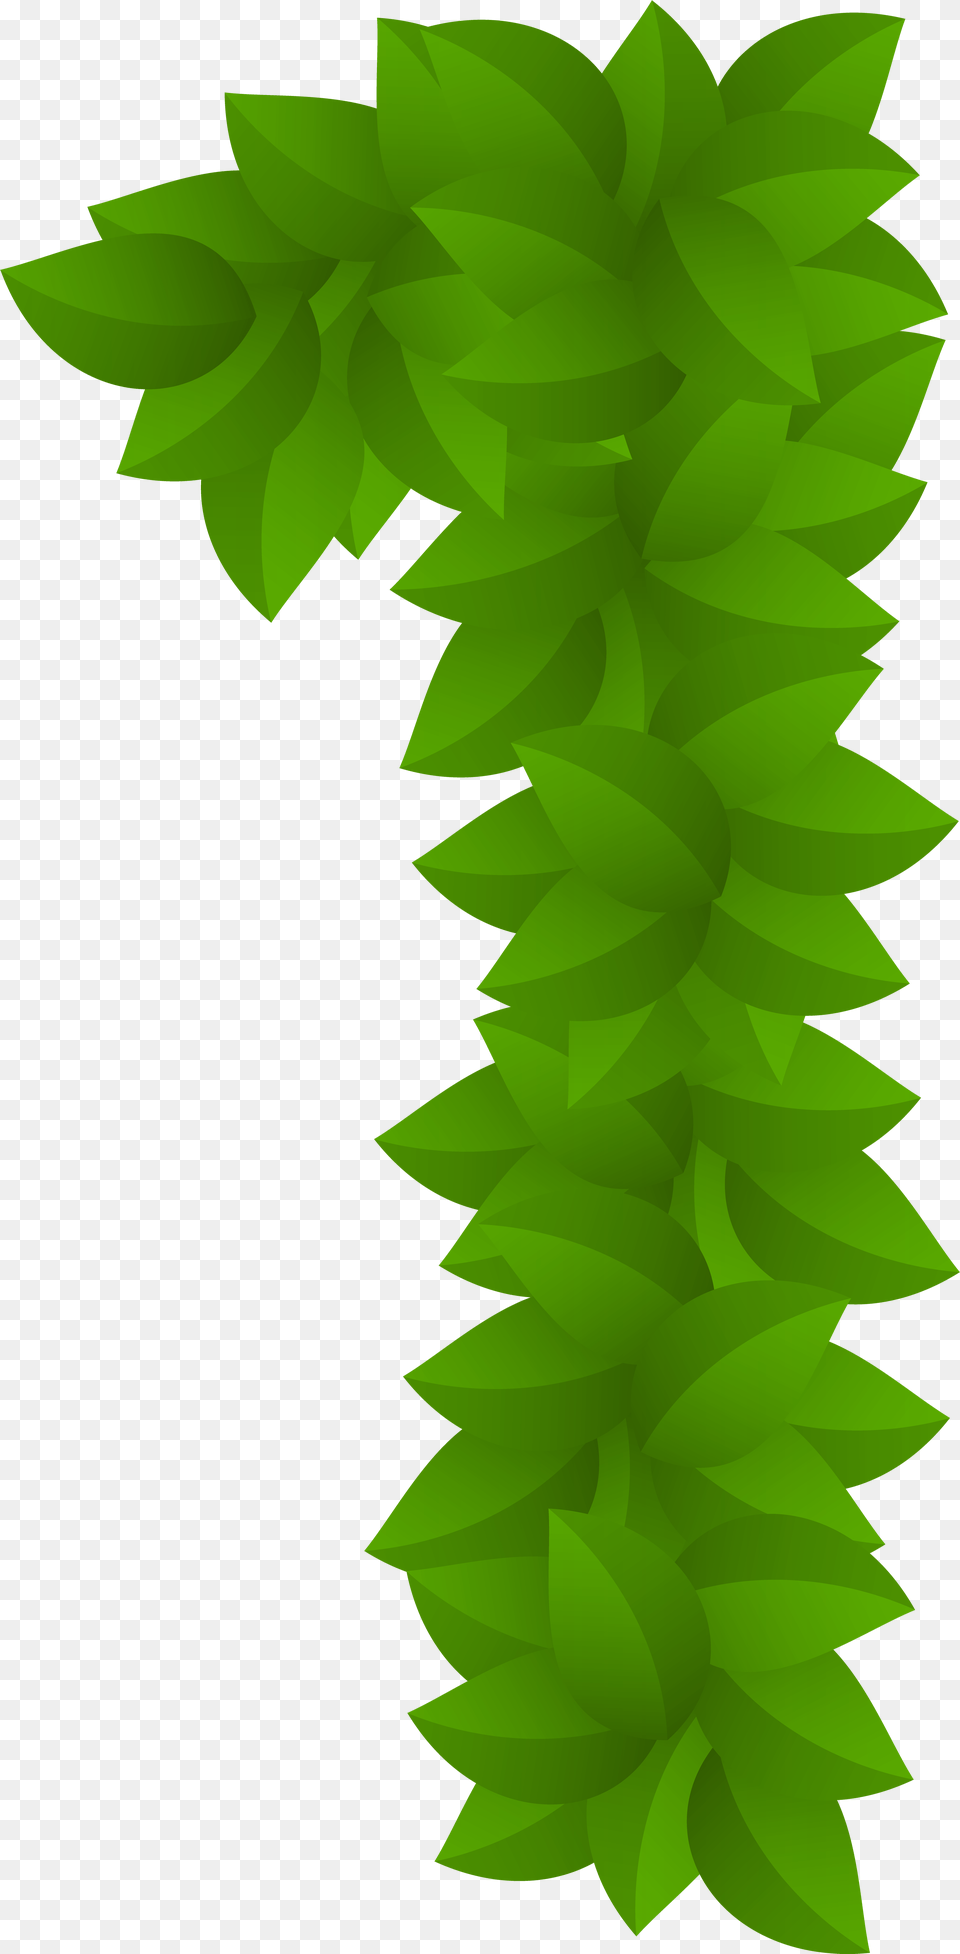 Green Leaves Clipart One Leaf Leaf Numbers Green, Accessories, Plant, Moss, Feather Boa Free Png Download